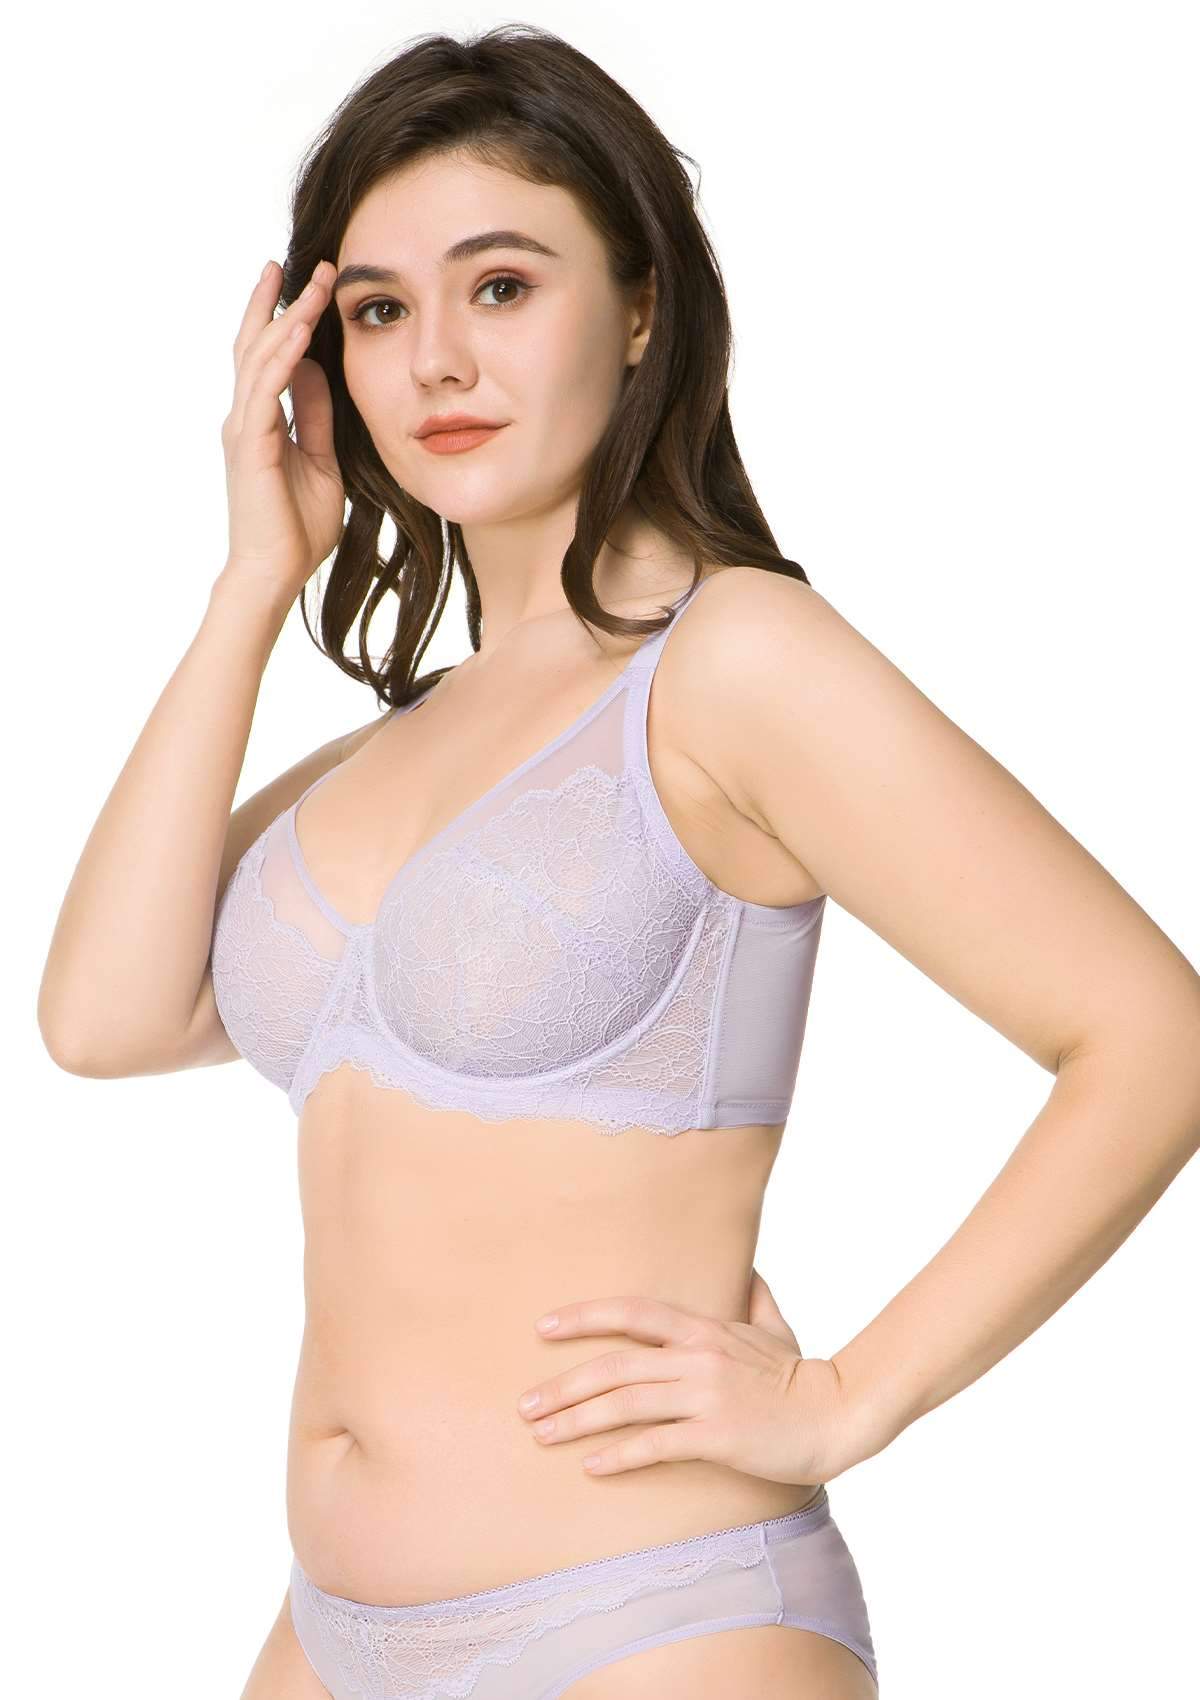 HSIA Wisteria Bra For Lift And Support - Full Coverage Minimizer Bra - Light Pink / 40 / DDD/F